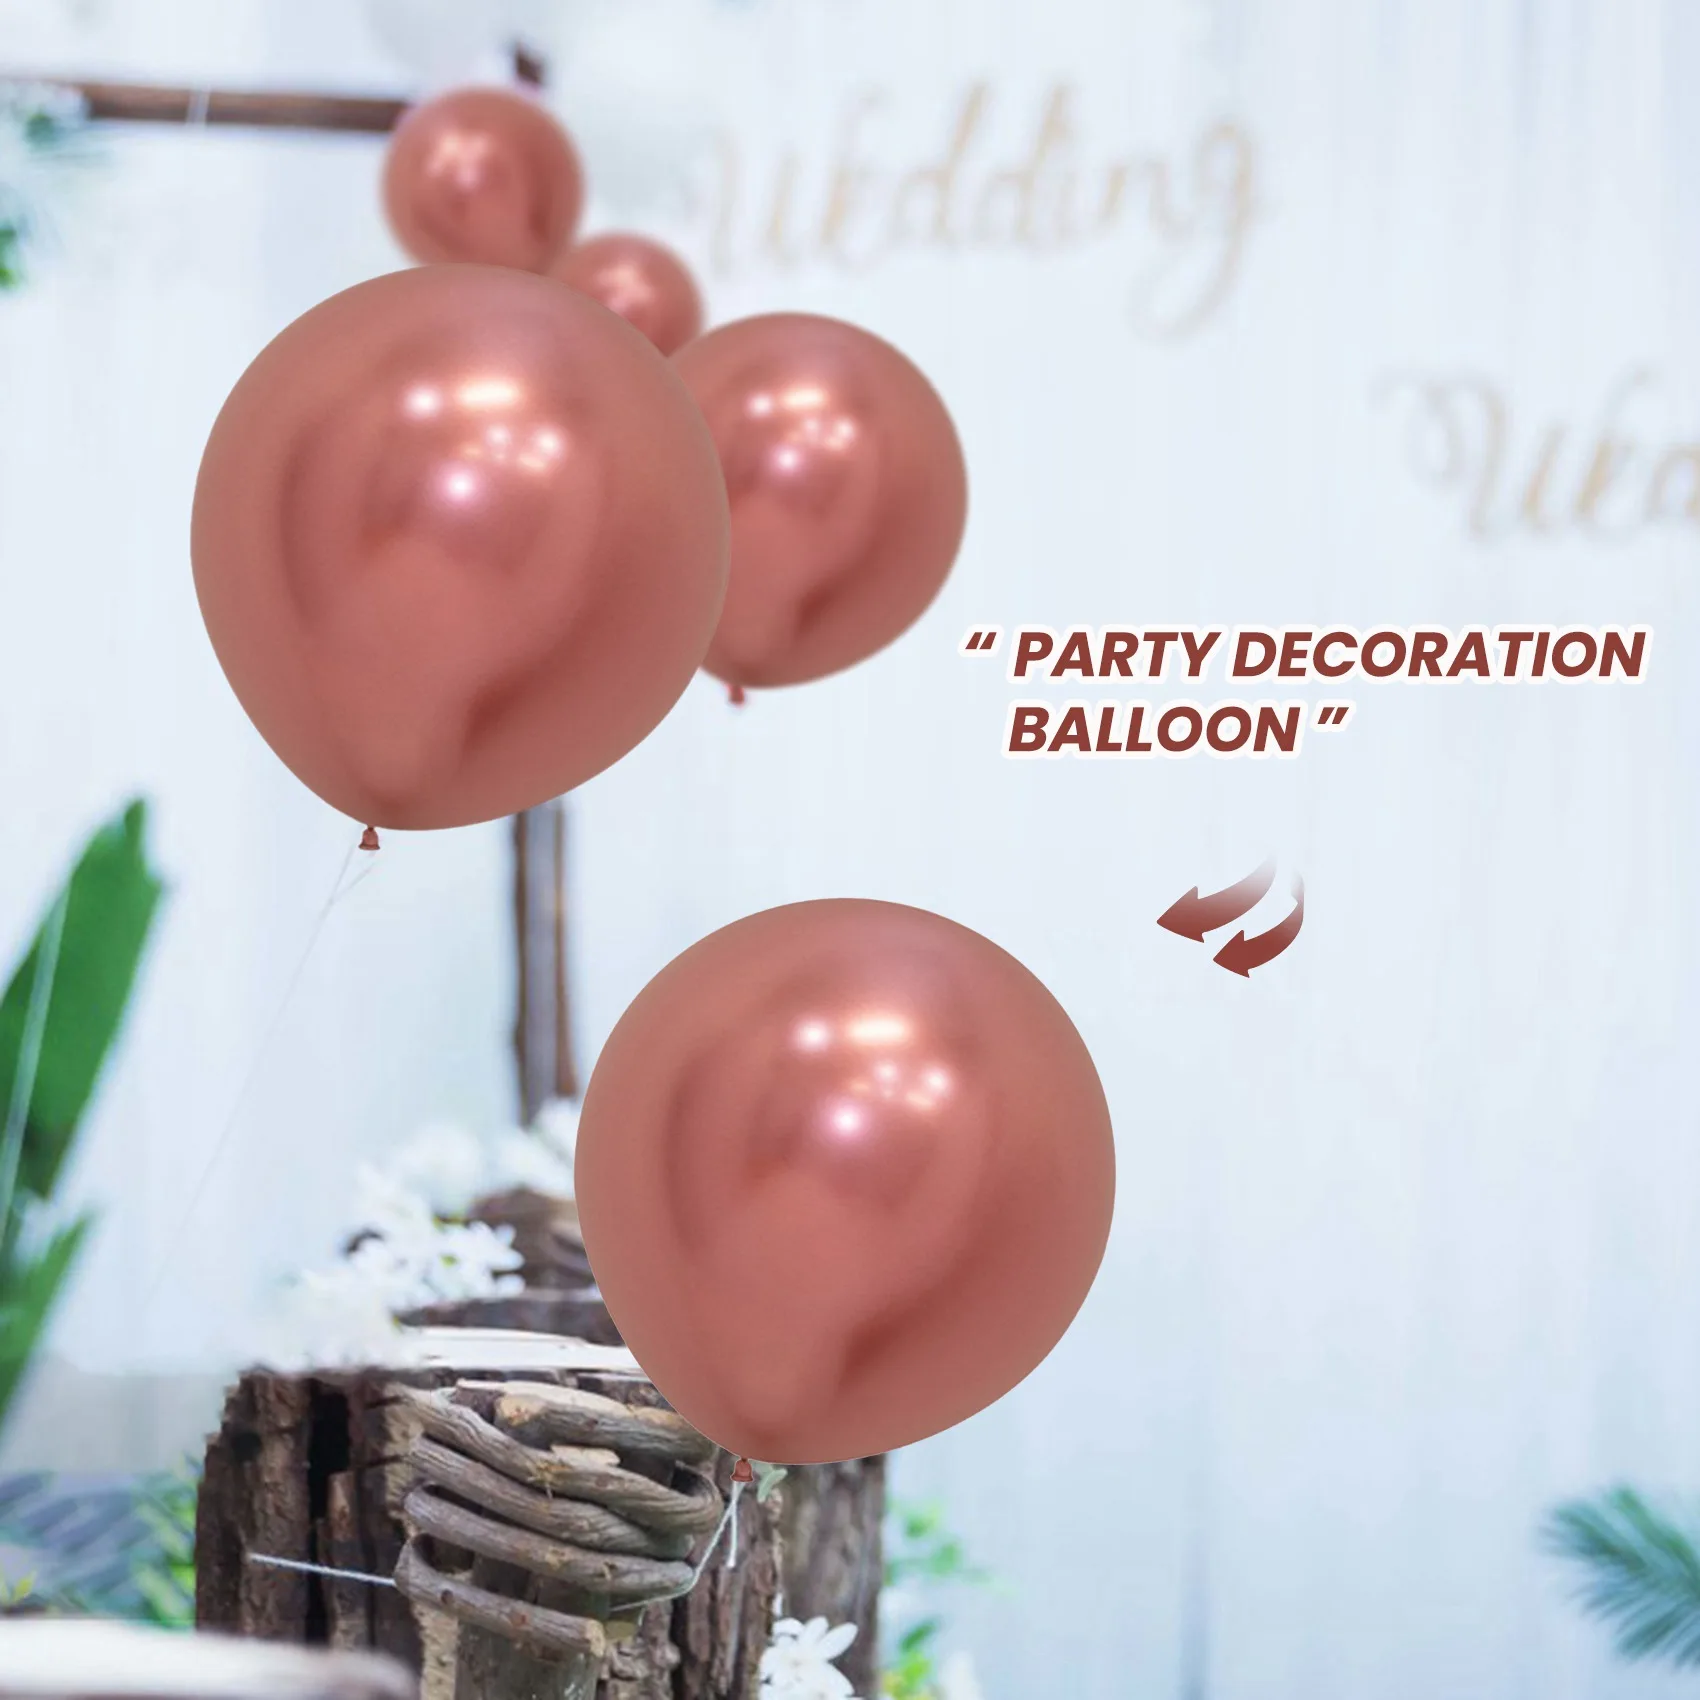 

50Pcs 10 Inch Metallic Latex Balloons Thick Chrome Glossy Metal Pearl Balloon Globos for Party Decor - Rose Gold